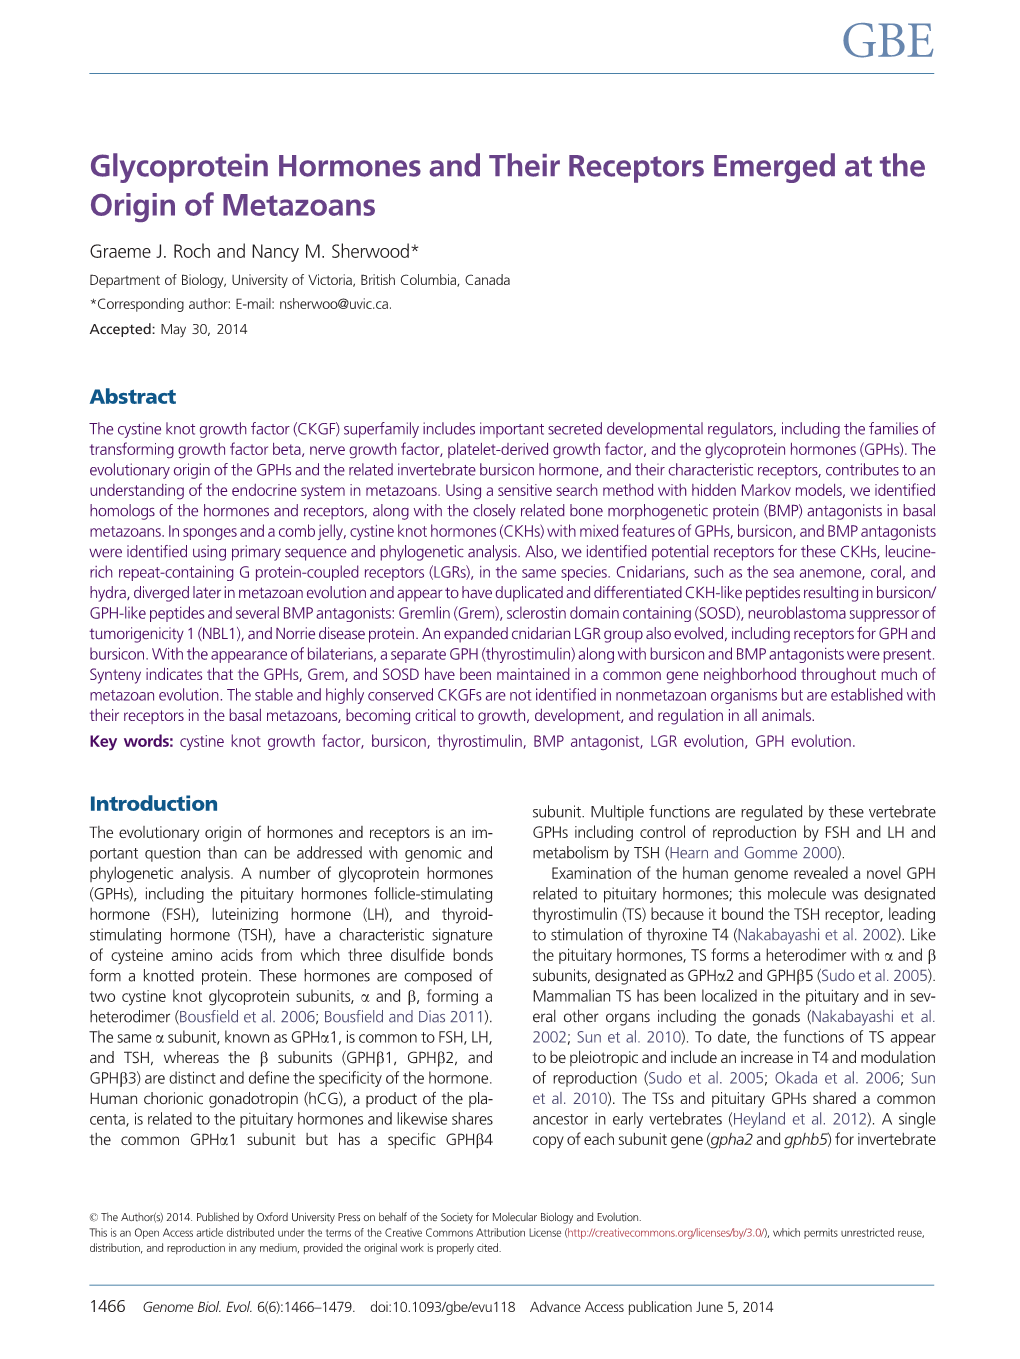 Glycoprotein Hormones and Their Receptors Emerged at the Origin of Metazoans